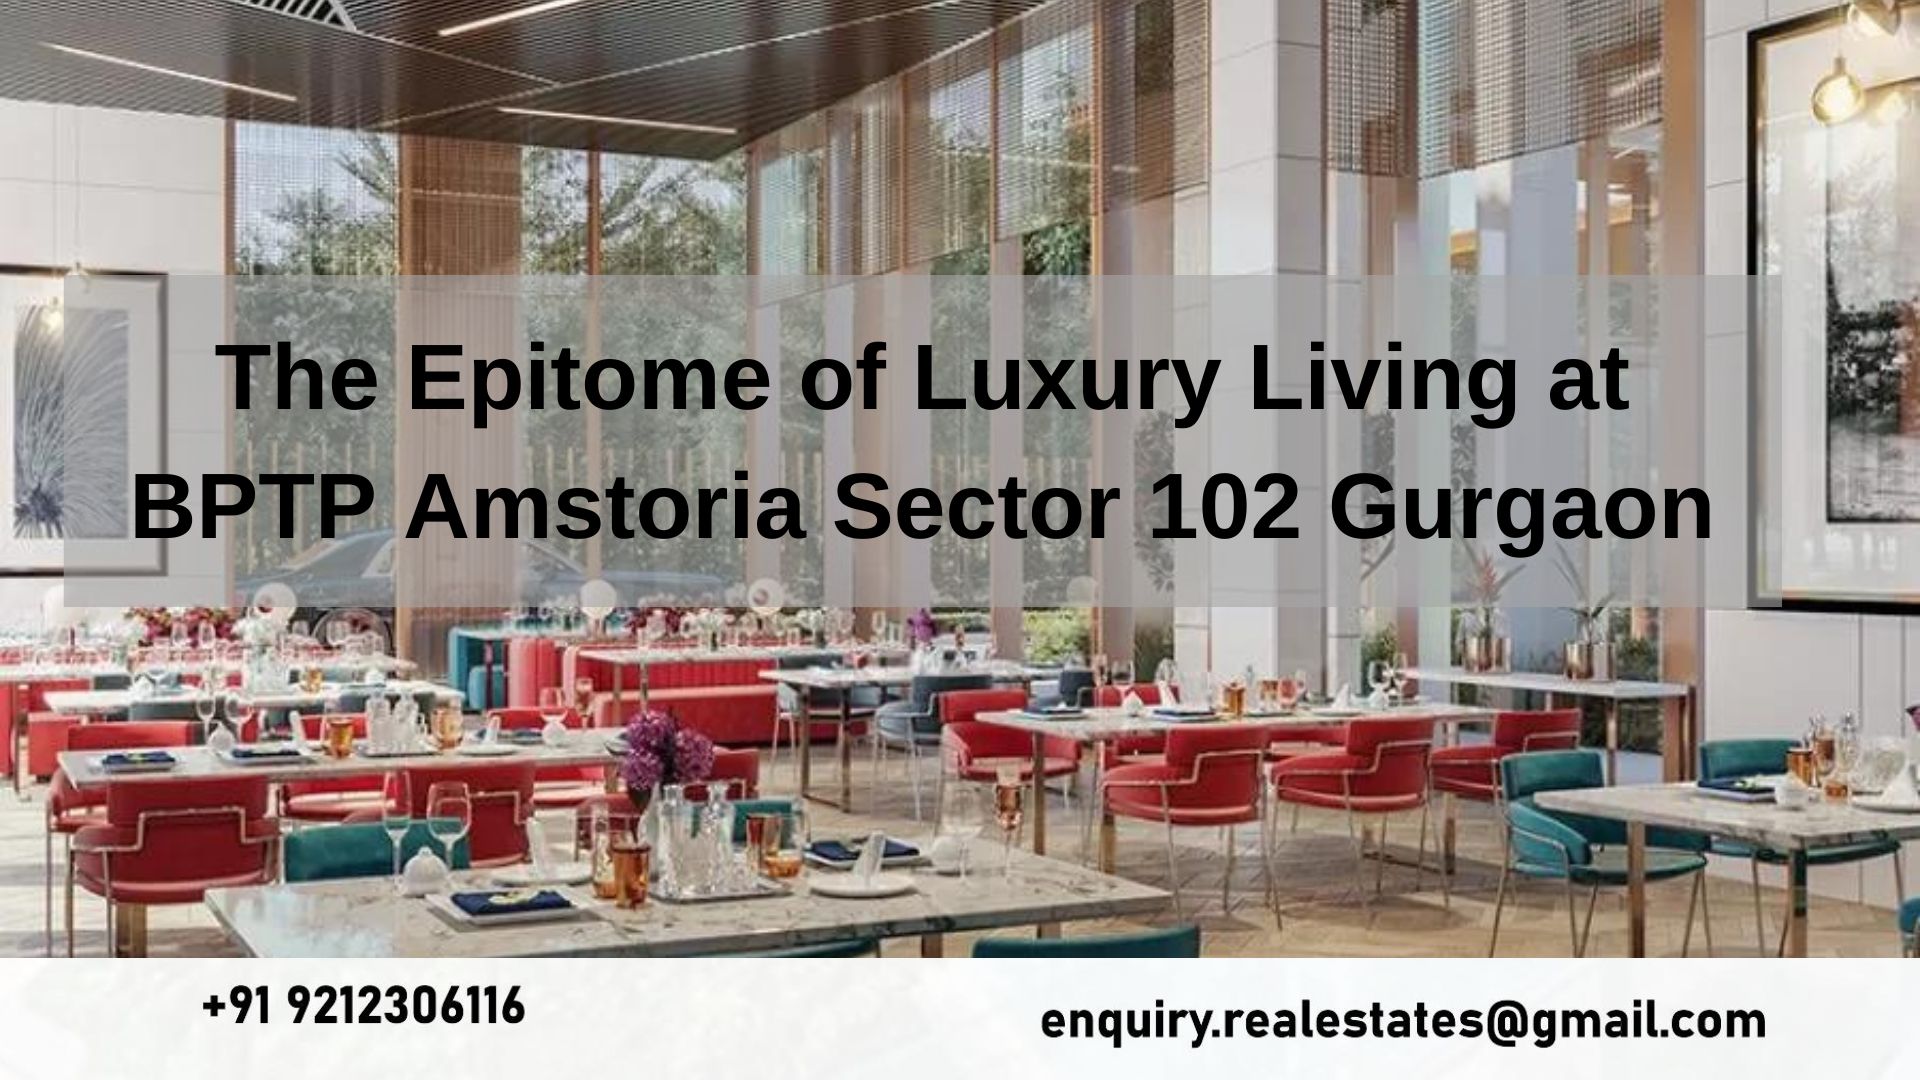 The Epitome of Luxury Living at BPTP Amstoria Sector 102 Gurgaon